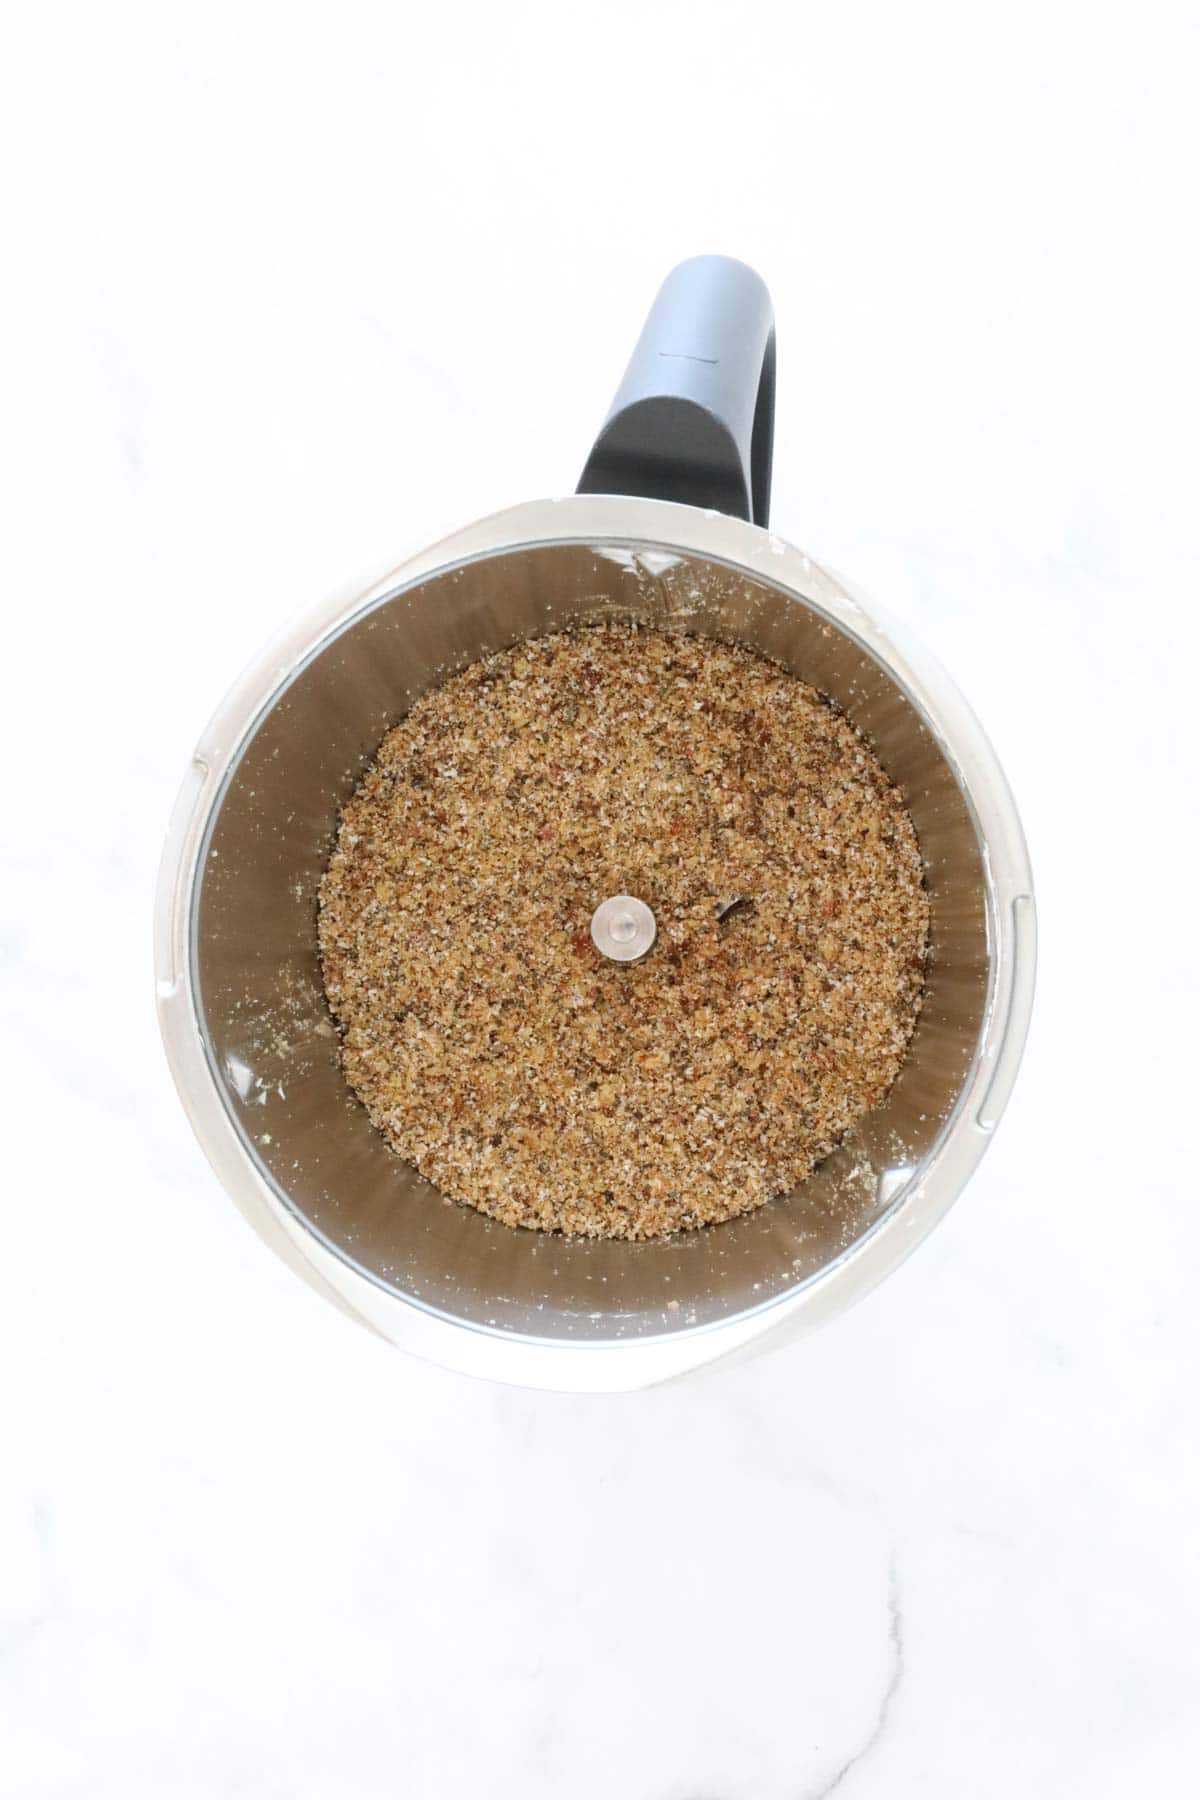 A Thermomix bowl filled with mixture.